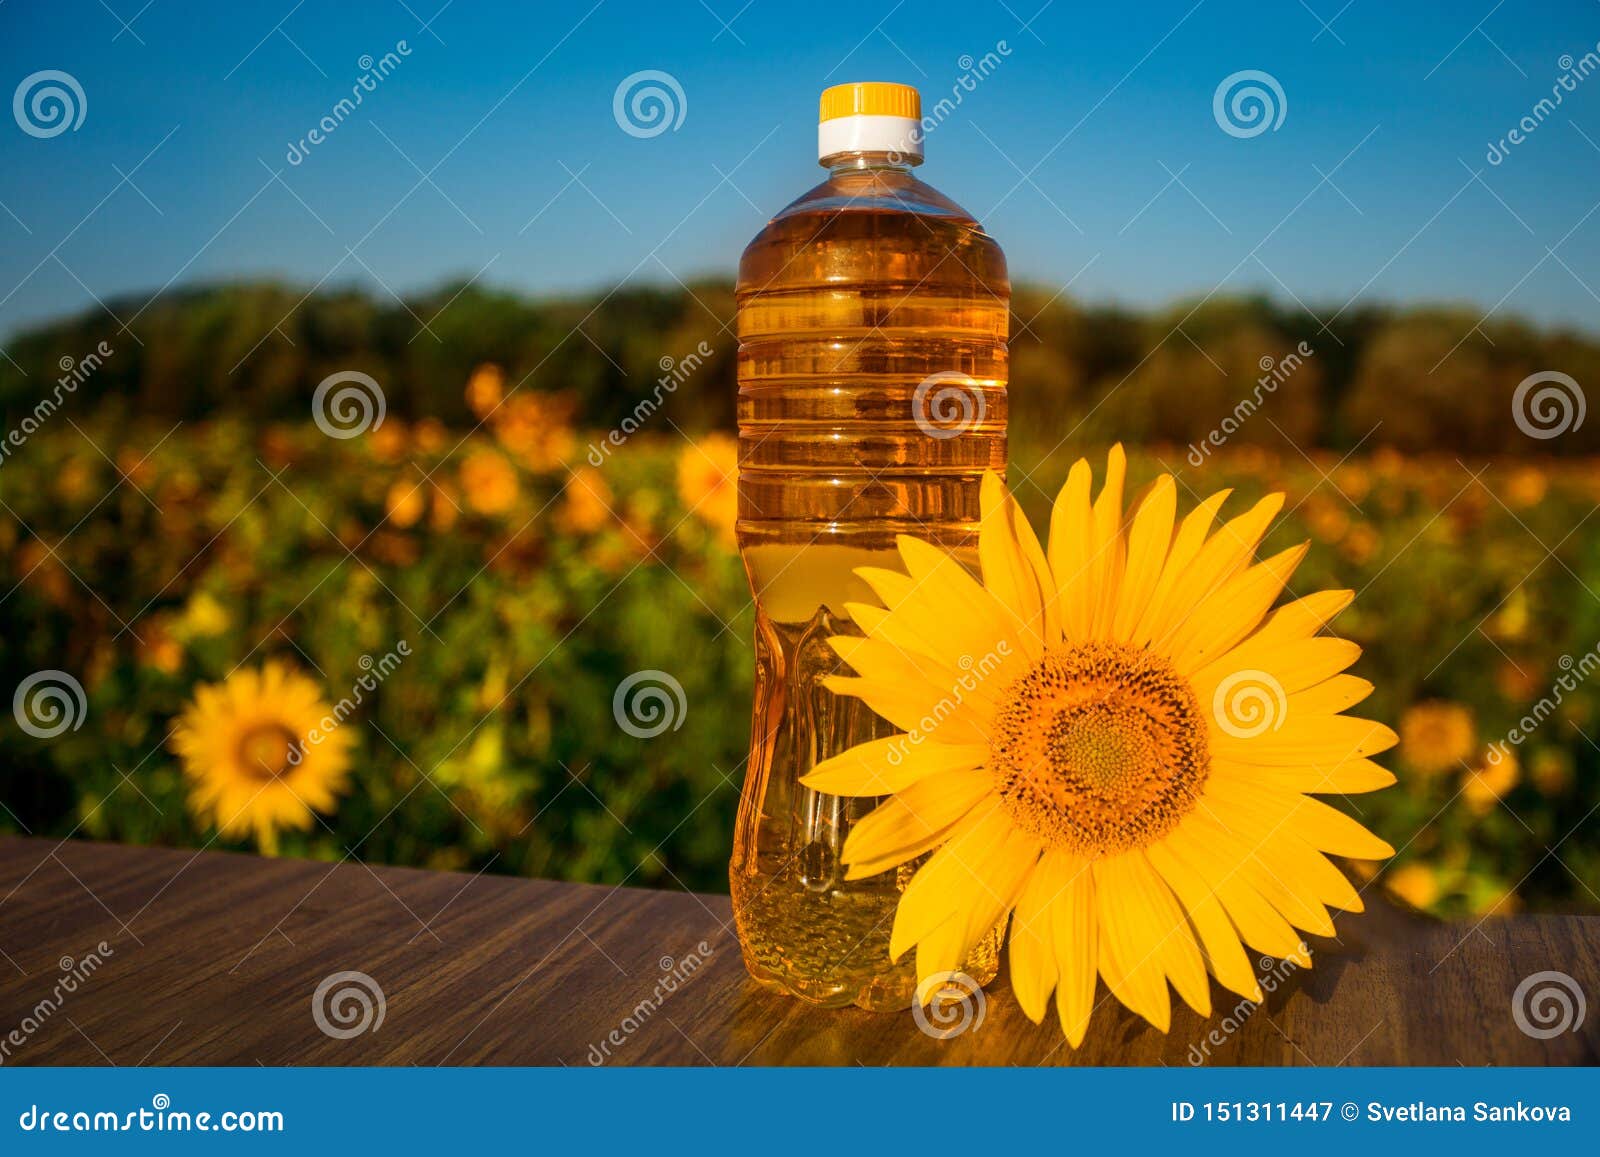 bottle of oil on wooden stand with sunflowers field background. sunflower oil improves skin health